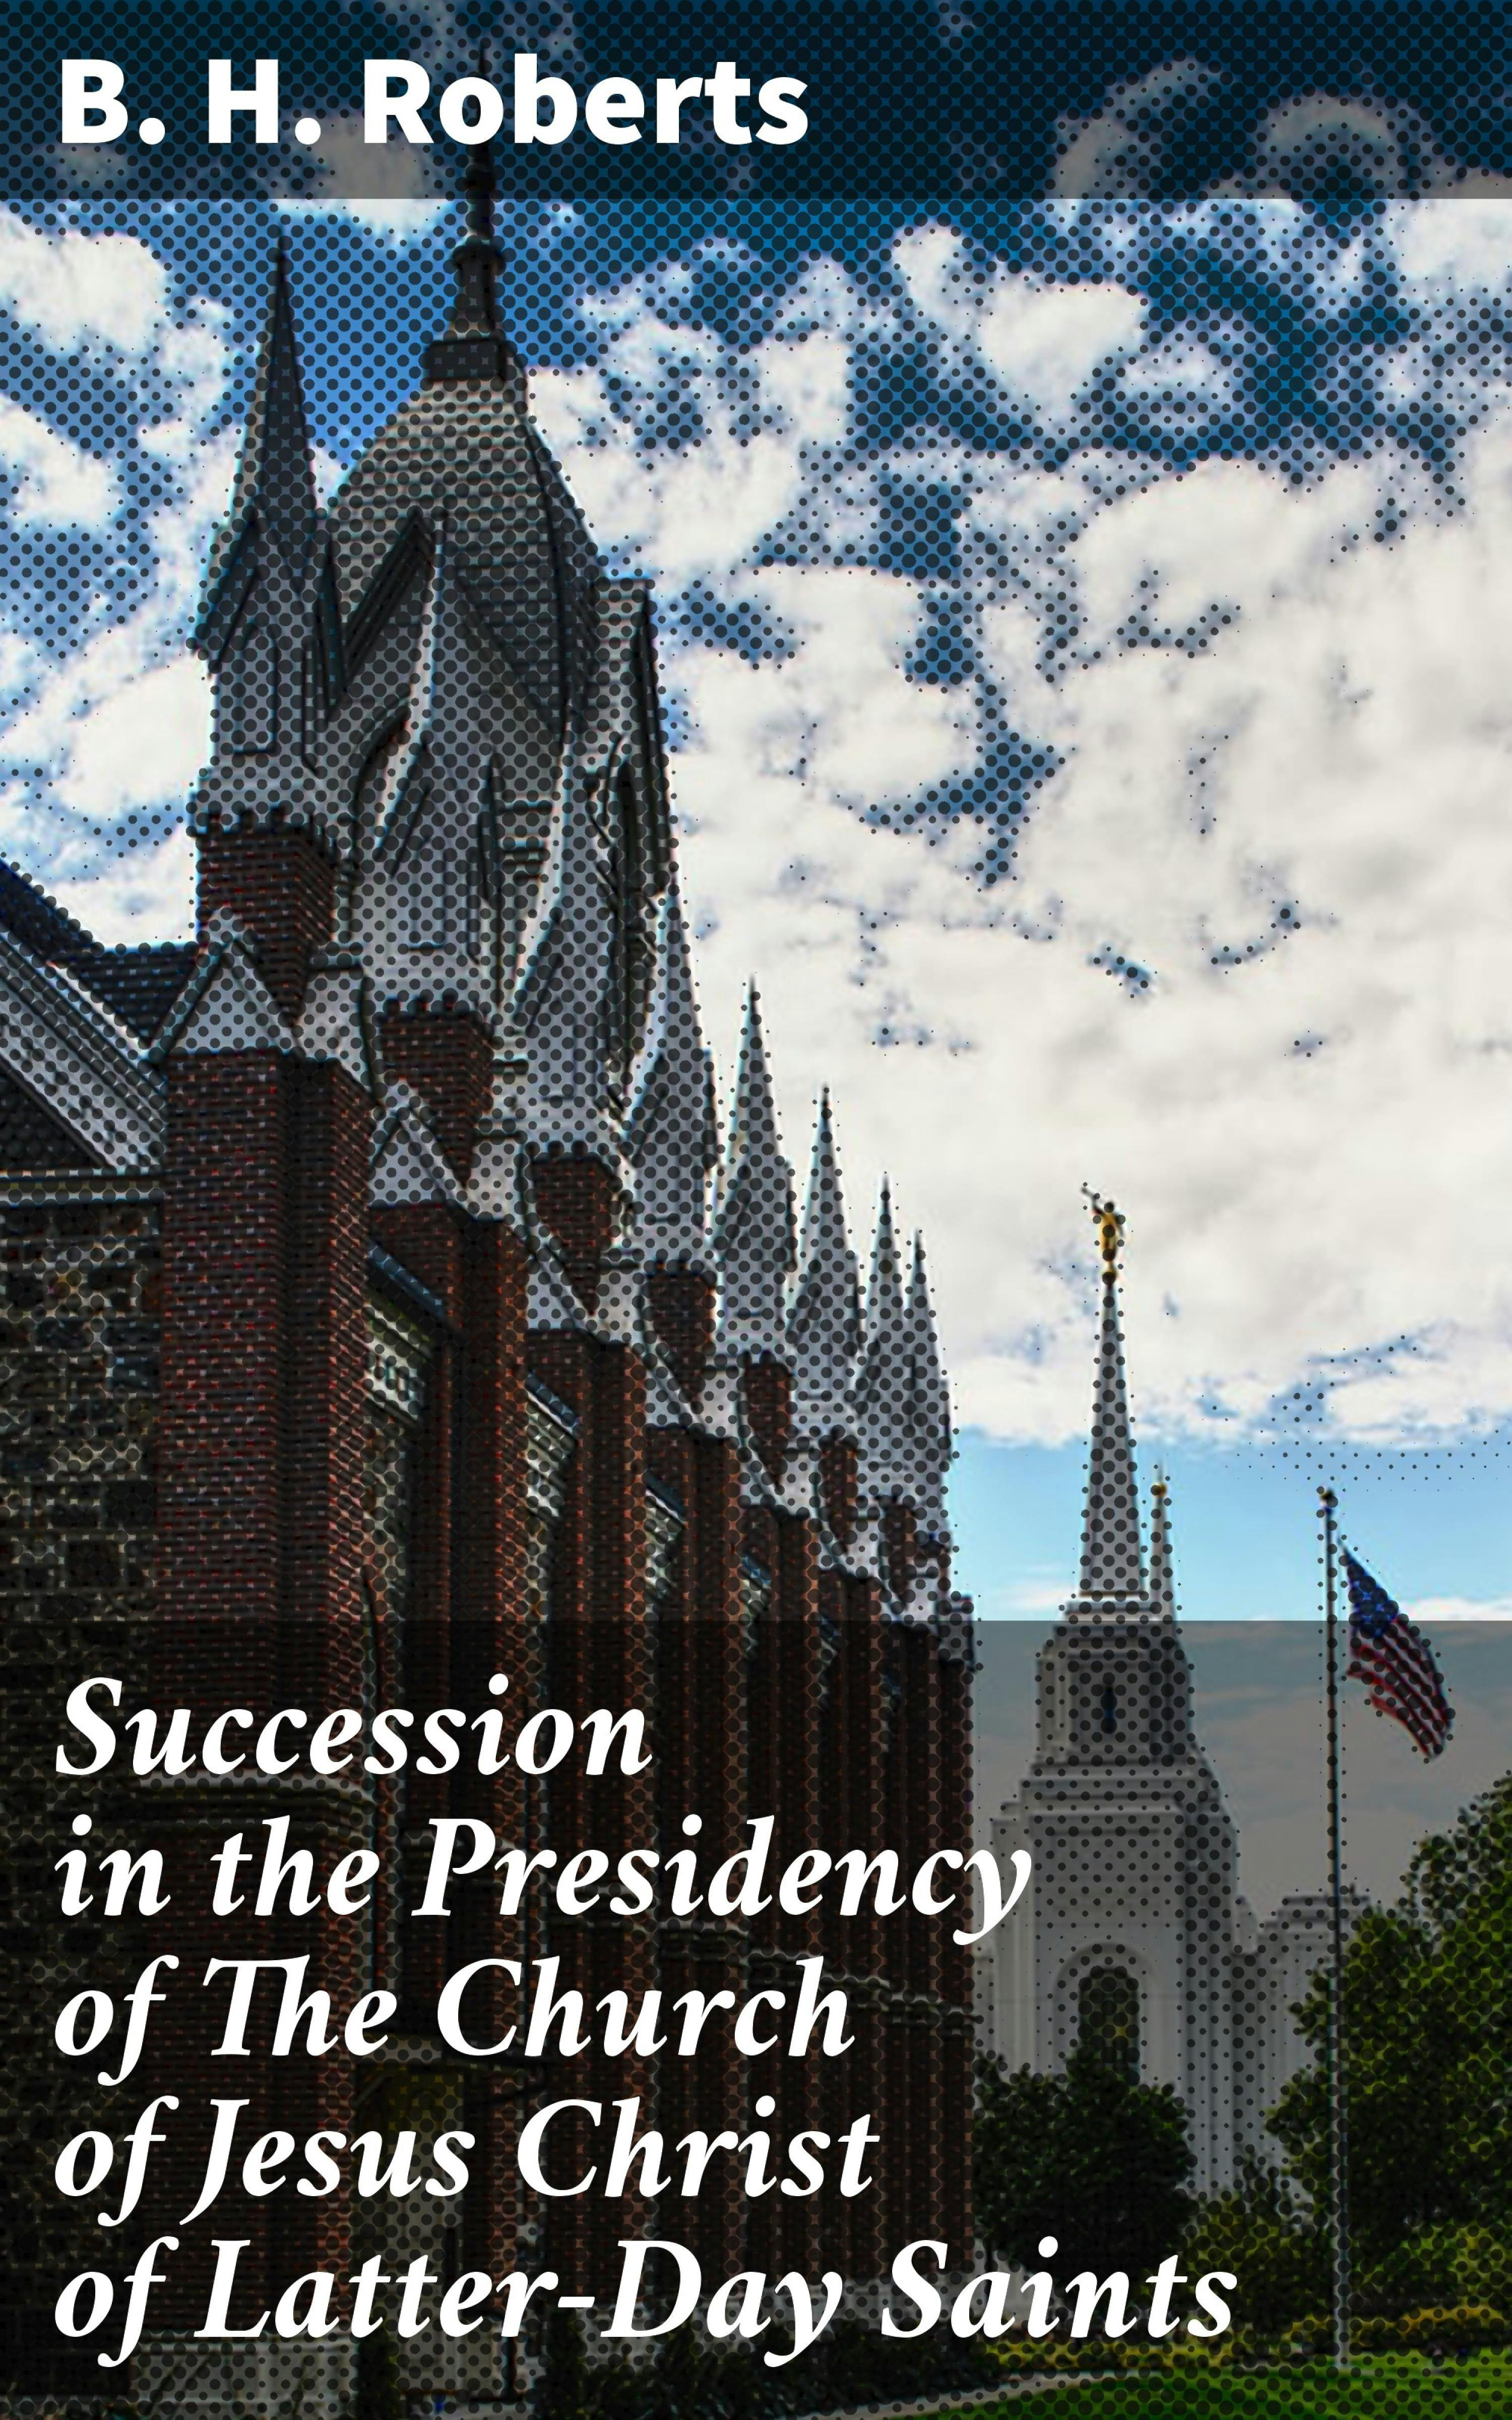 Succession in the Presidency of The Church of Jesus Christ of Latter-Day Saints - undefined